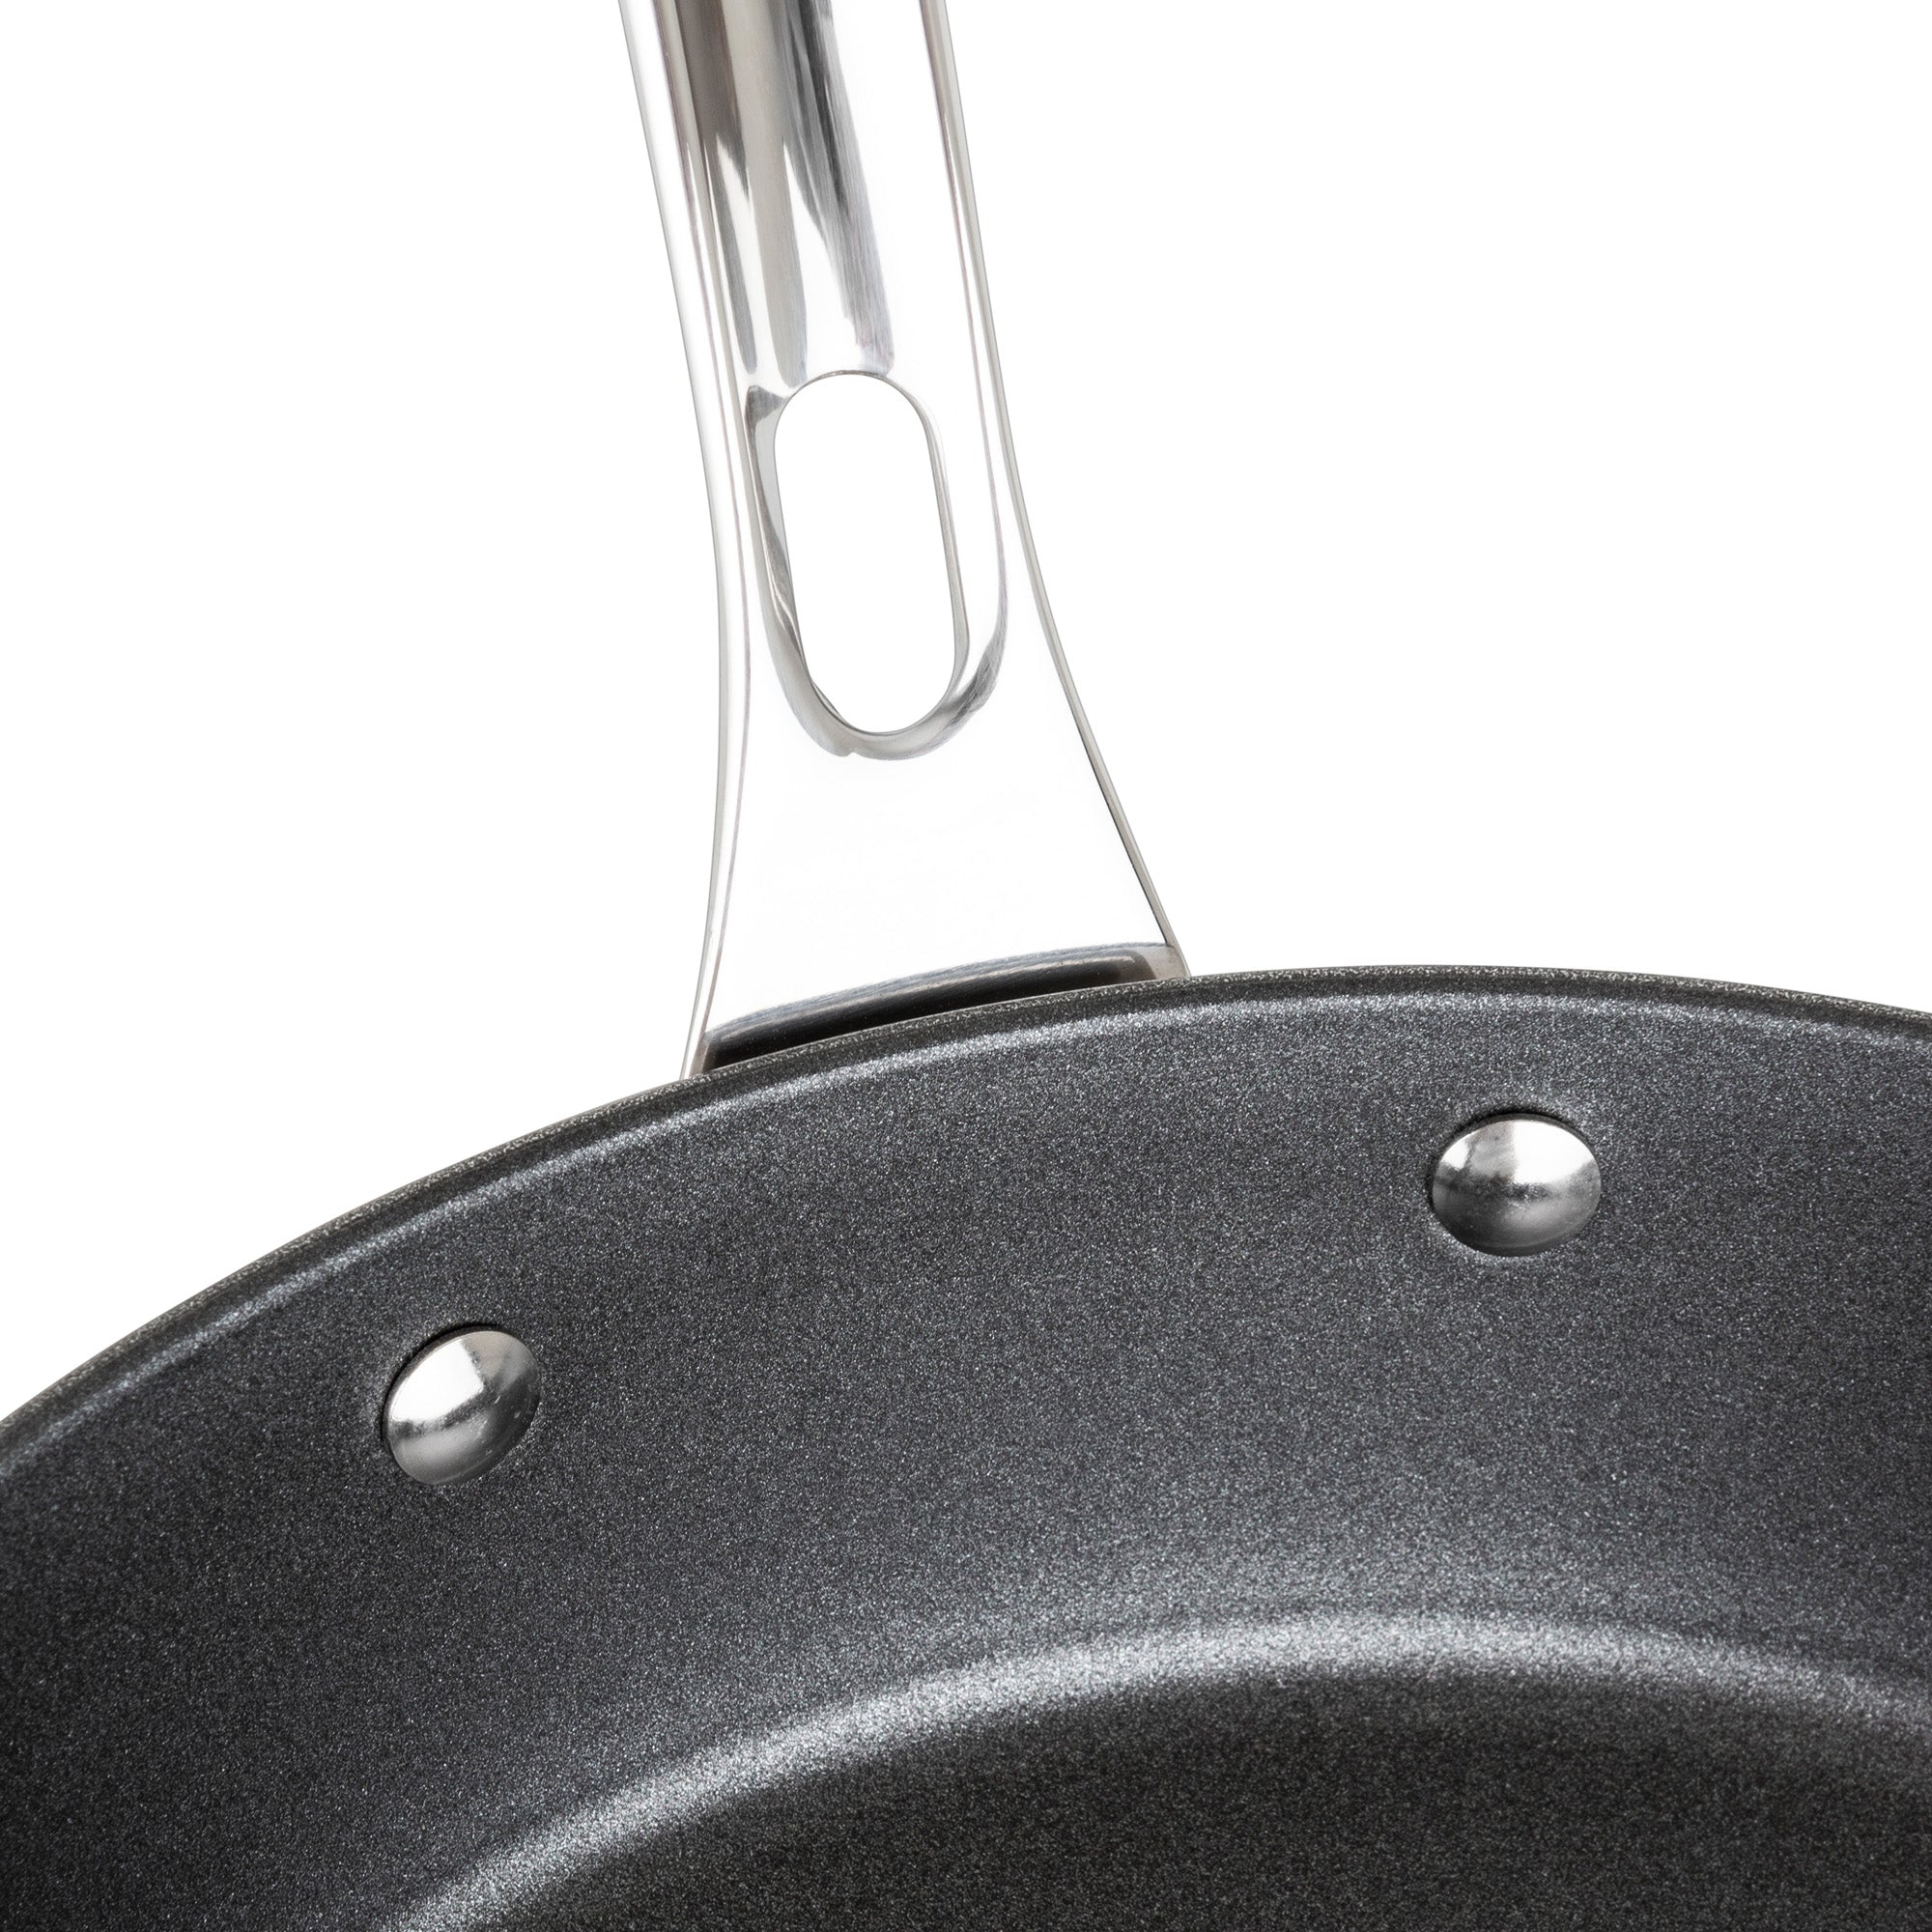 Viking Professional Nonstick 12 5-Ply Stainless Steel Covered Fry Pan